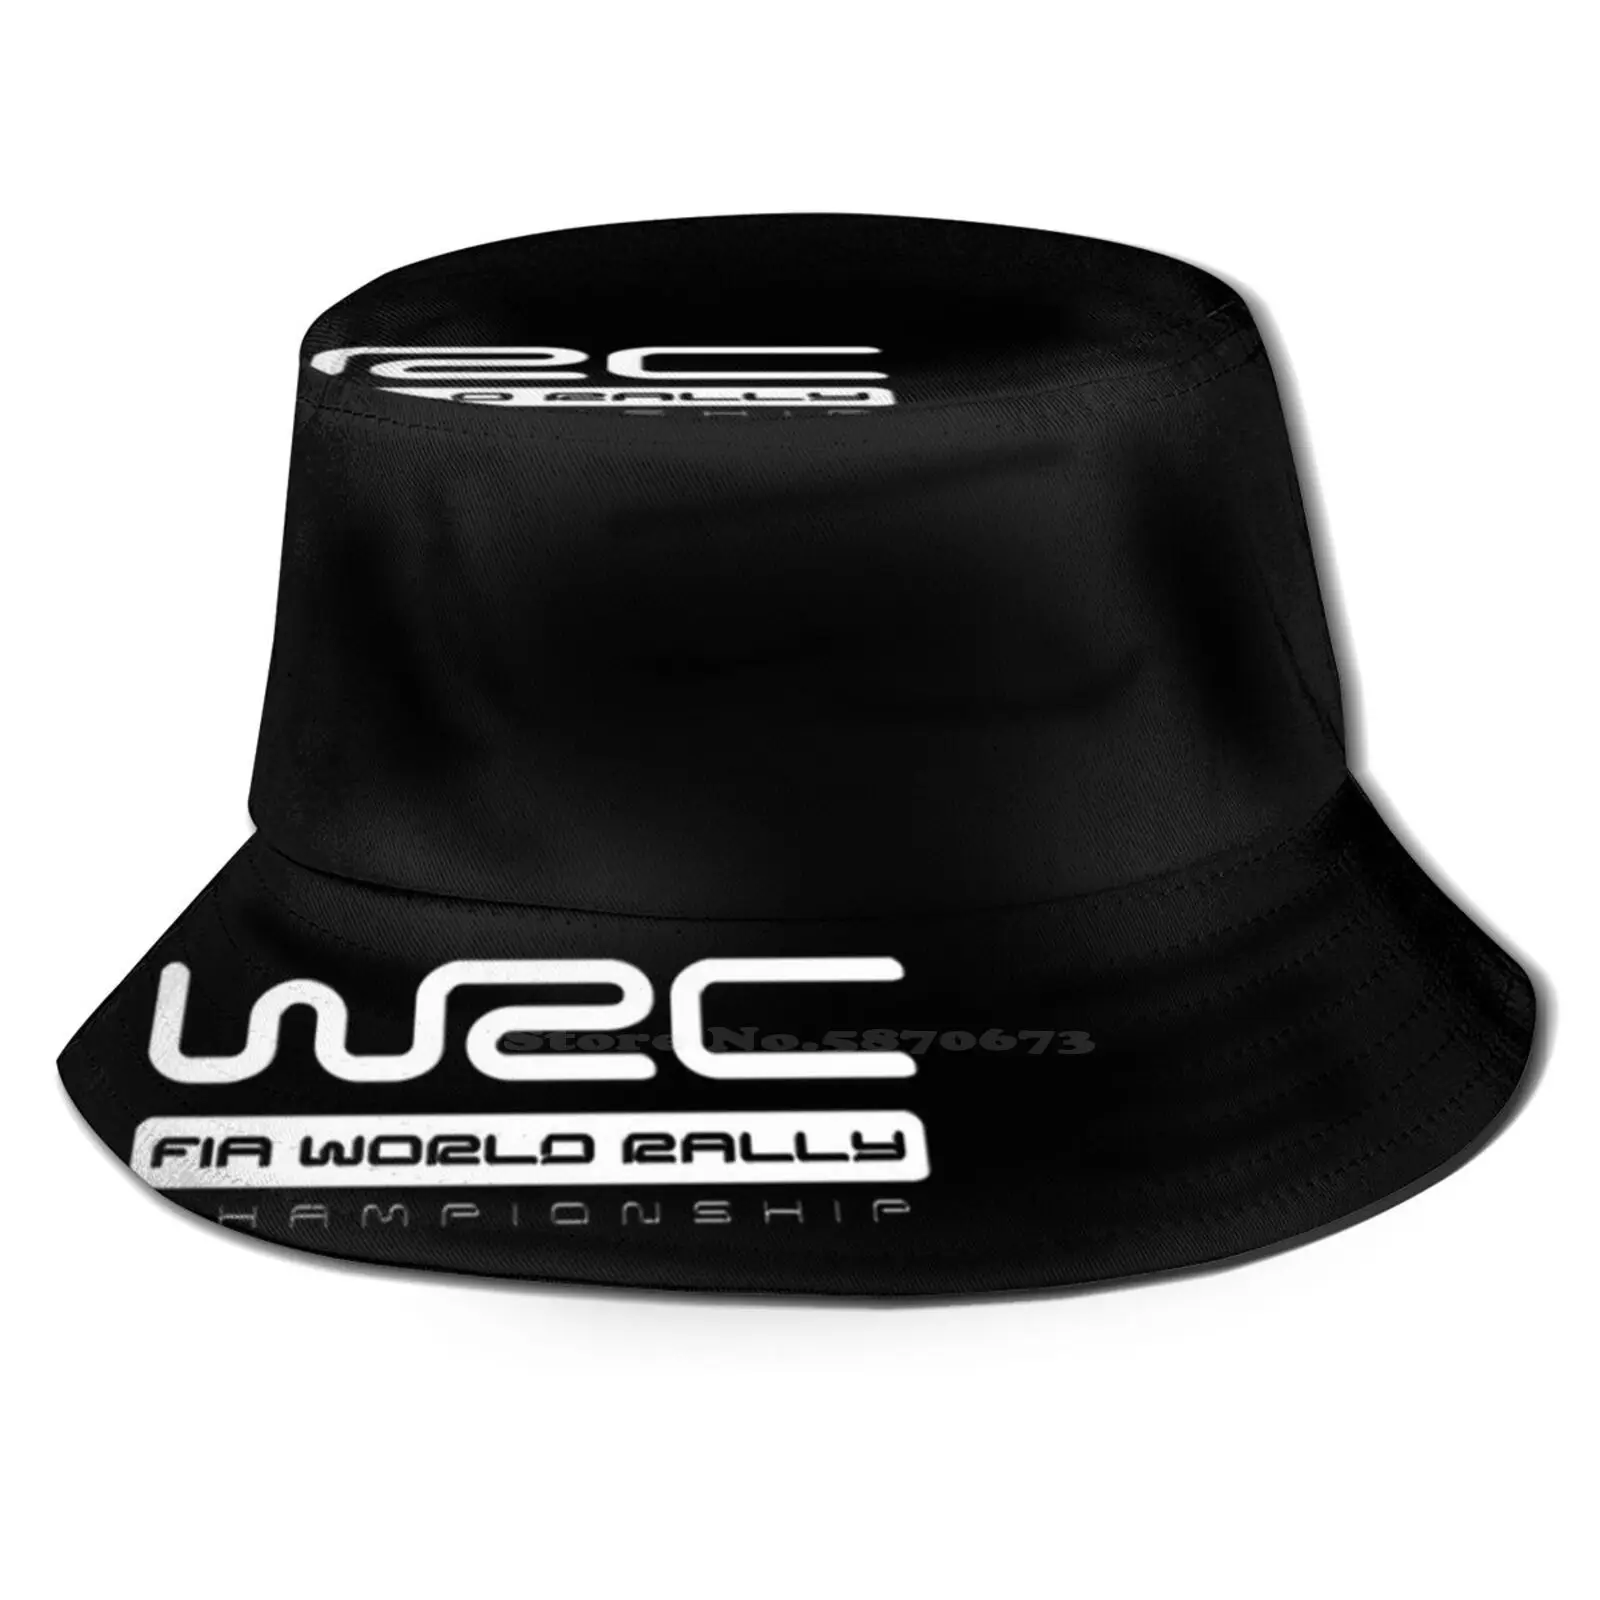 

Rally Of The World Fisherman's Hat Bucket Hats Caps Wrx Sti Race Competition Champ Club Auto Car Wrc Drag Drift Fast